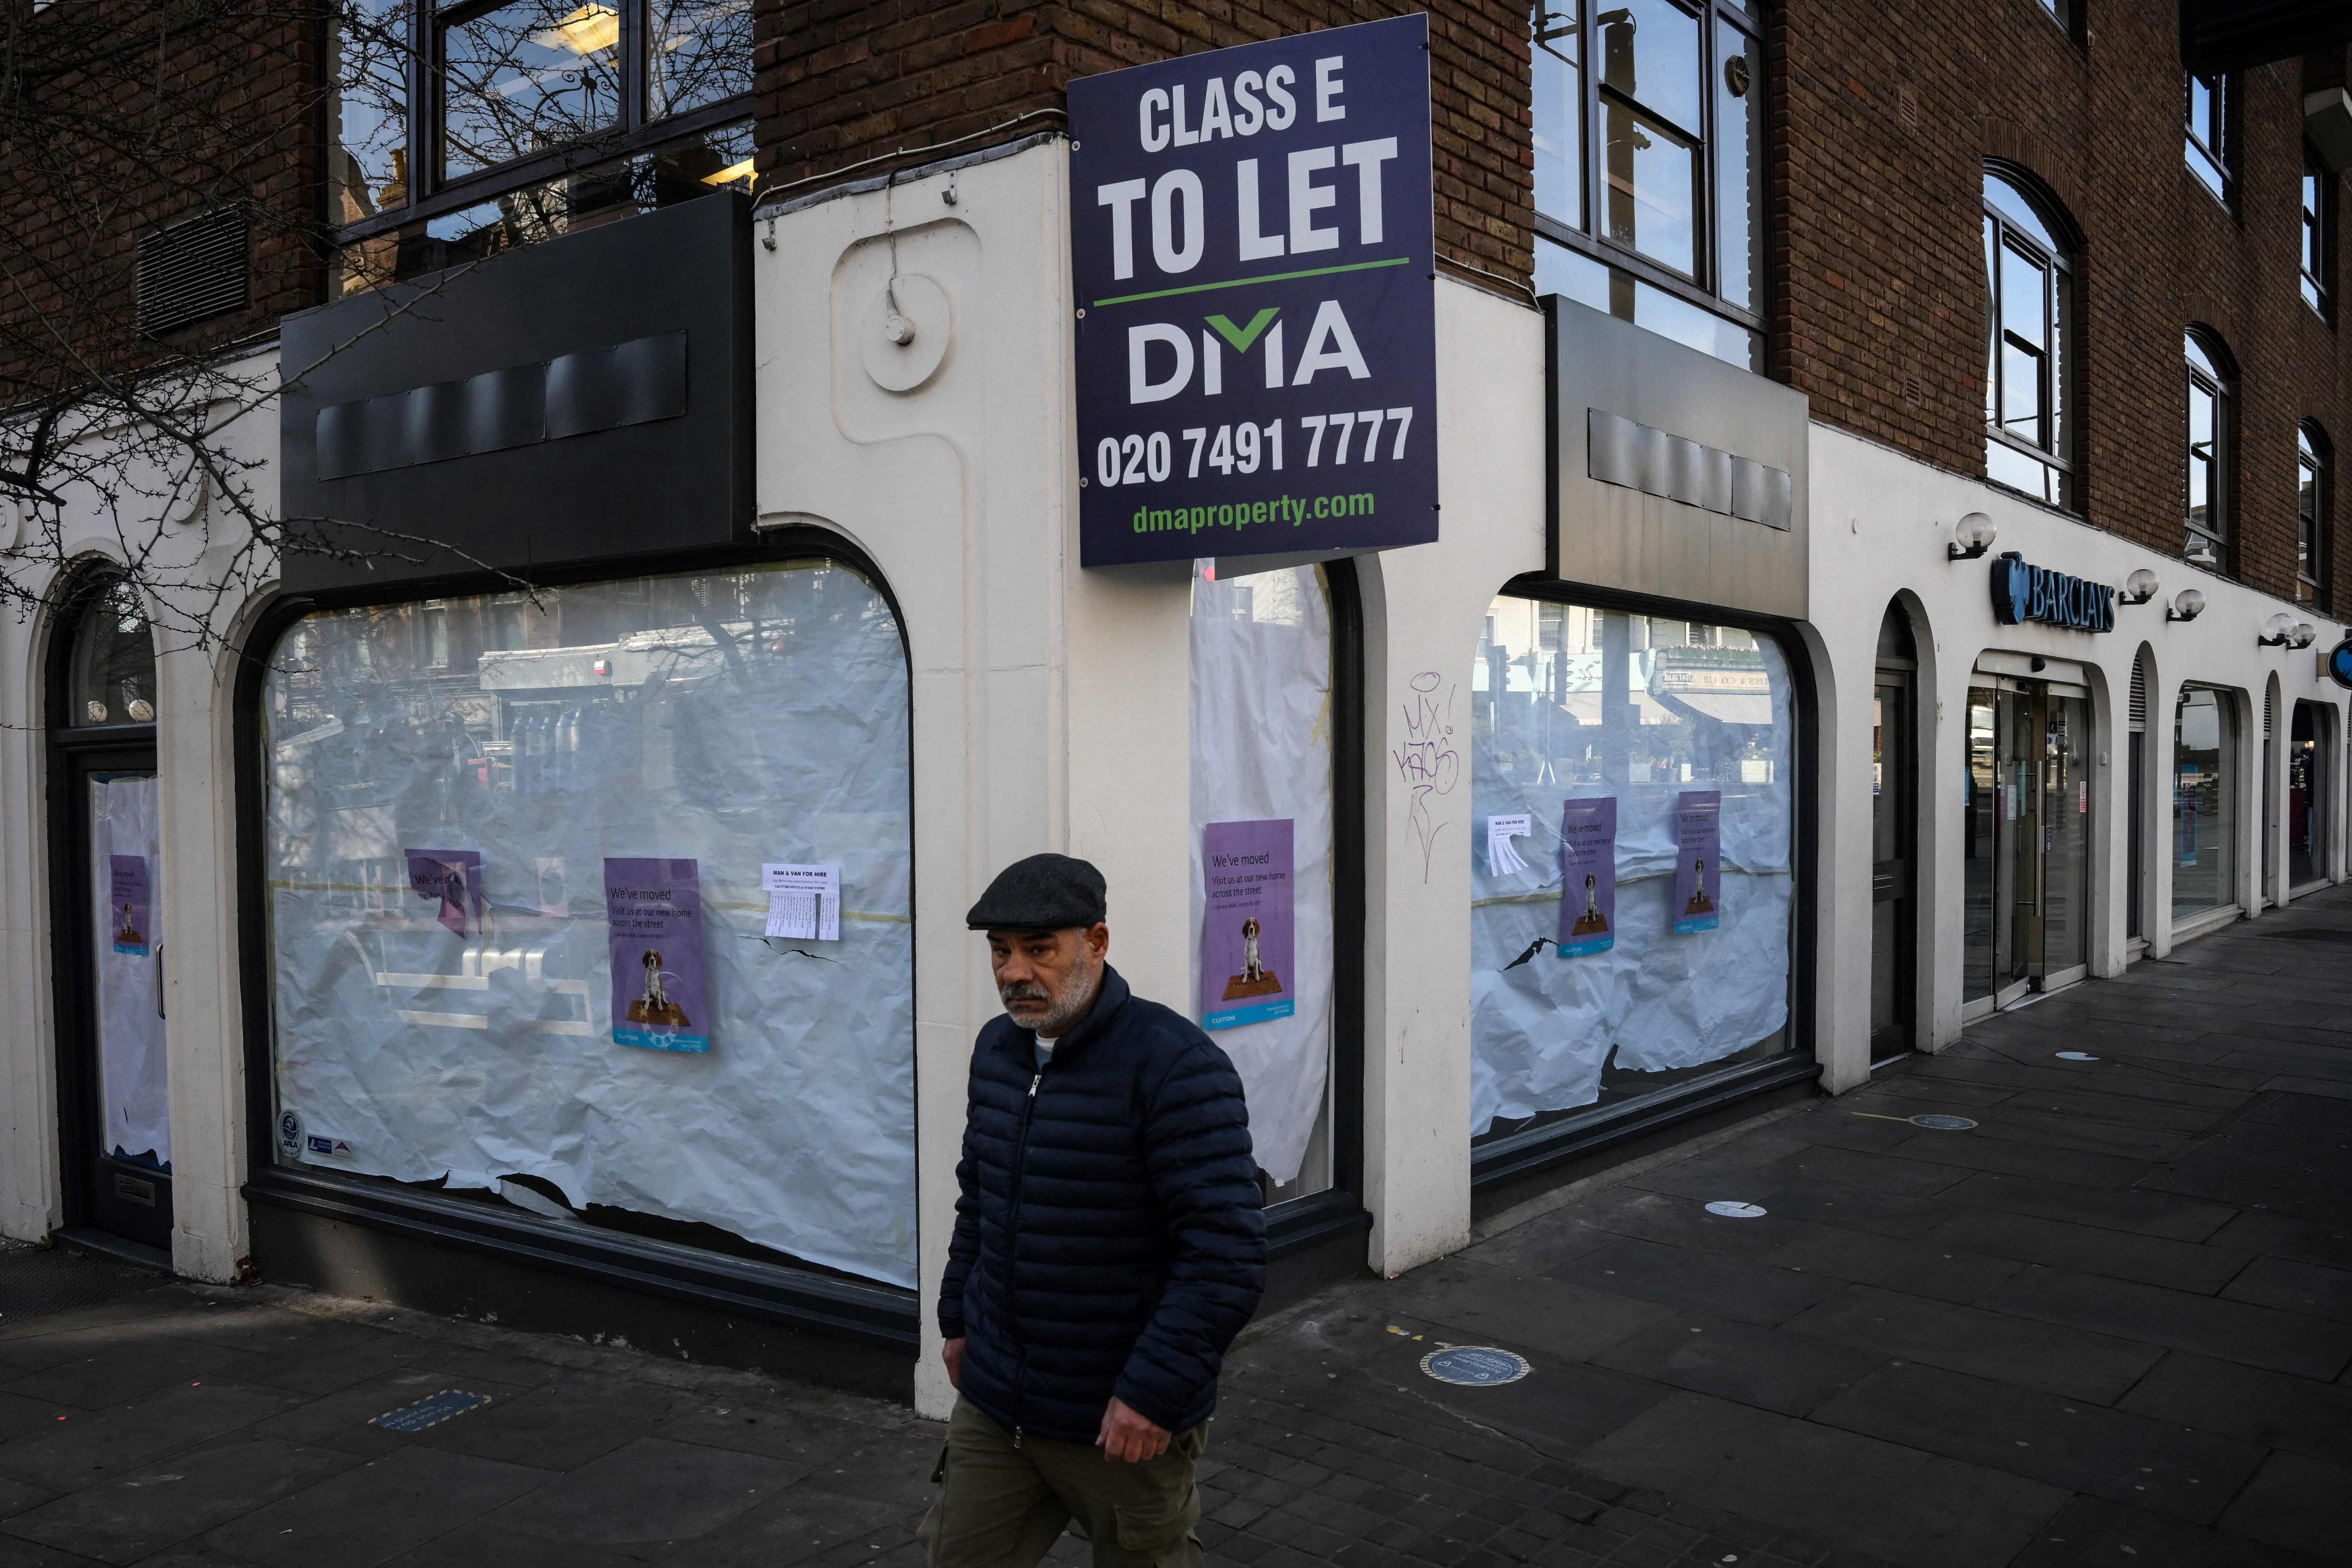 A pedestrian walks past a closed business in the Islington neighbourhood of London on February 10. Britain’s economy narrowly avoided recession, official data showed last week, but British officials warned it was “not out of the woods yet” over surging inflation. Photo: AFP